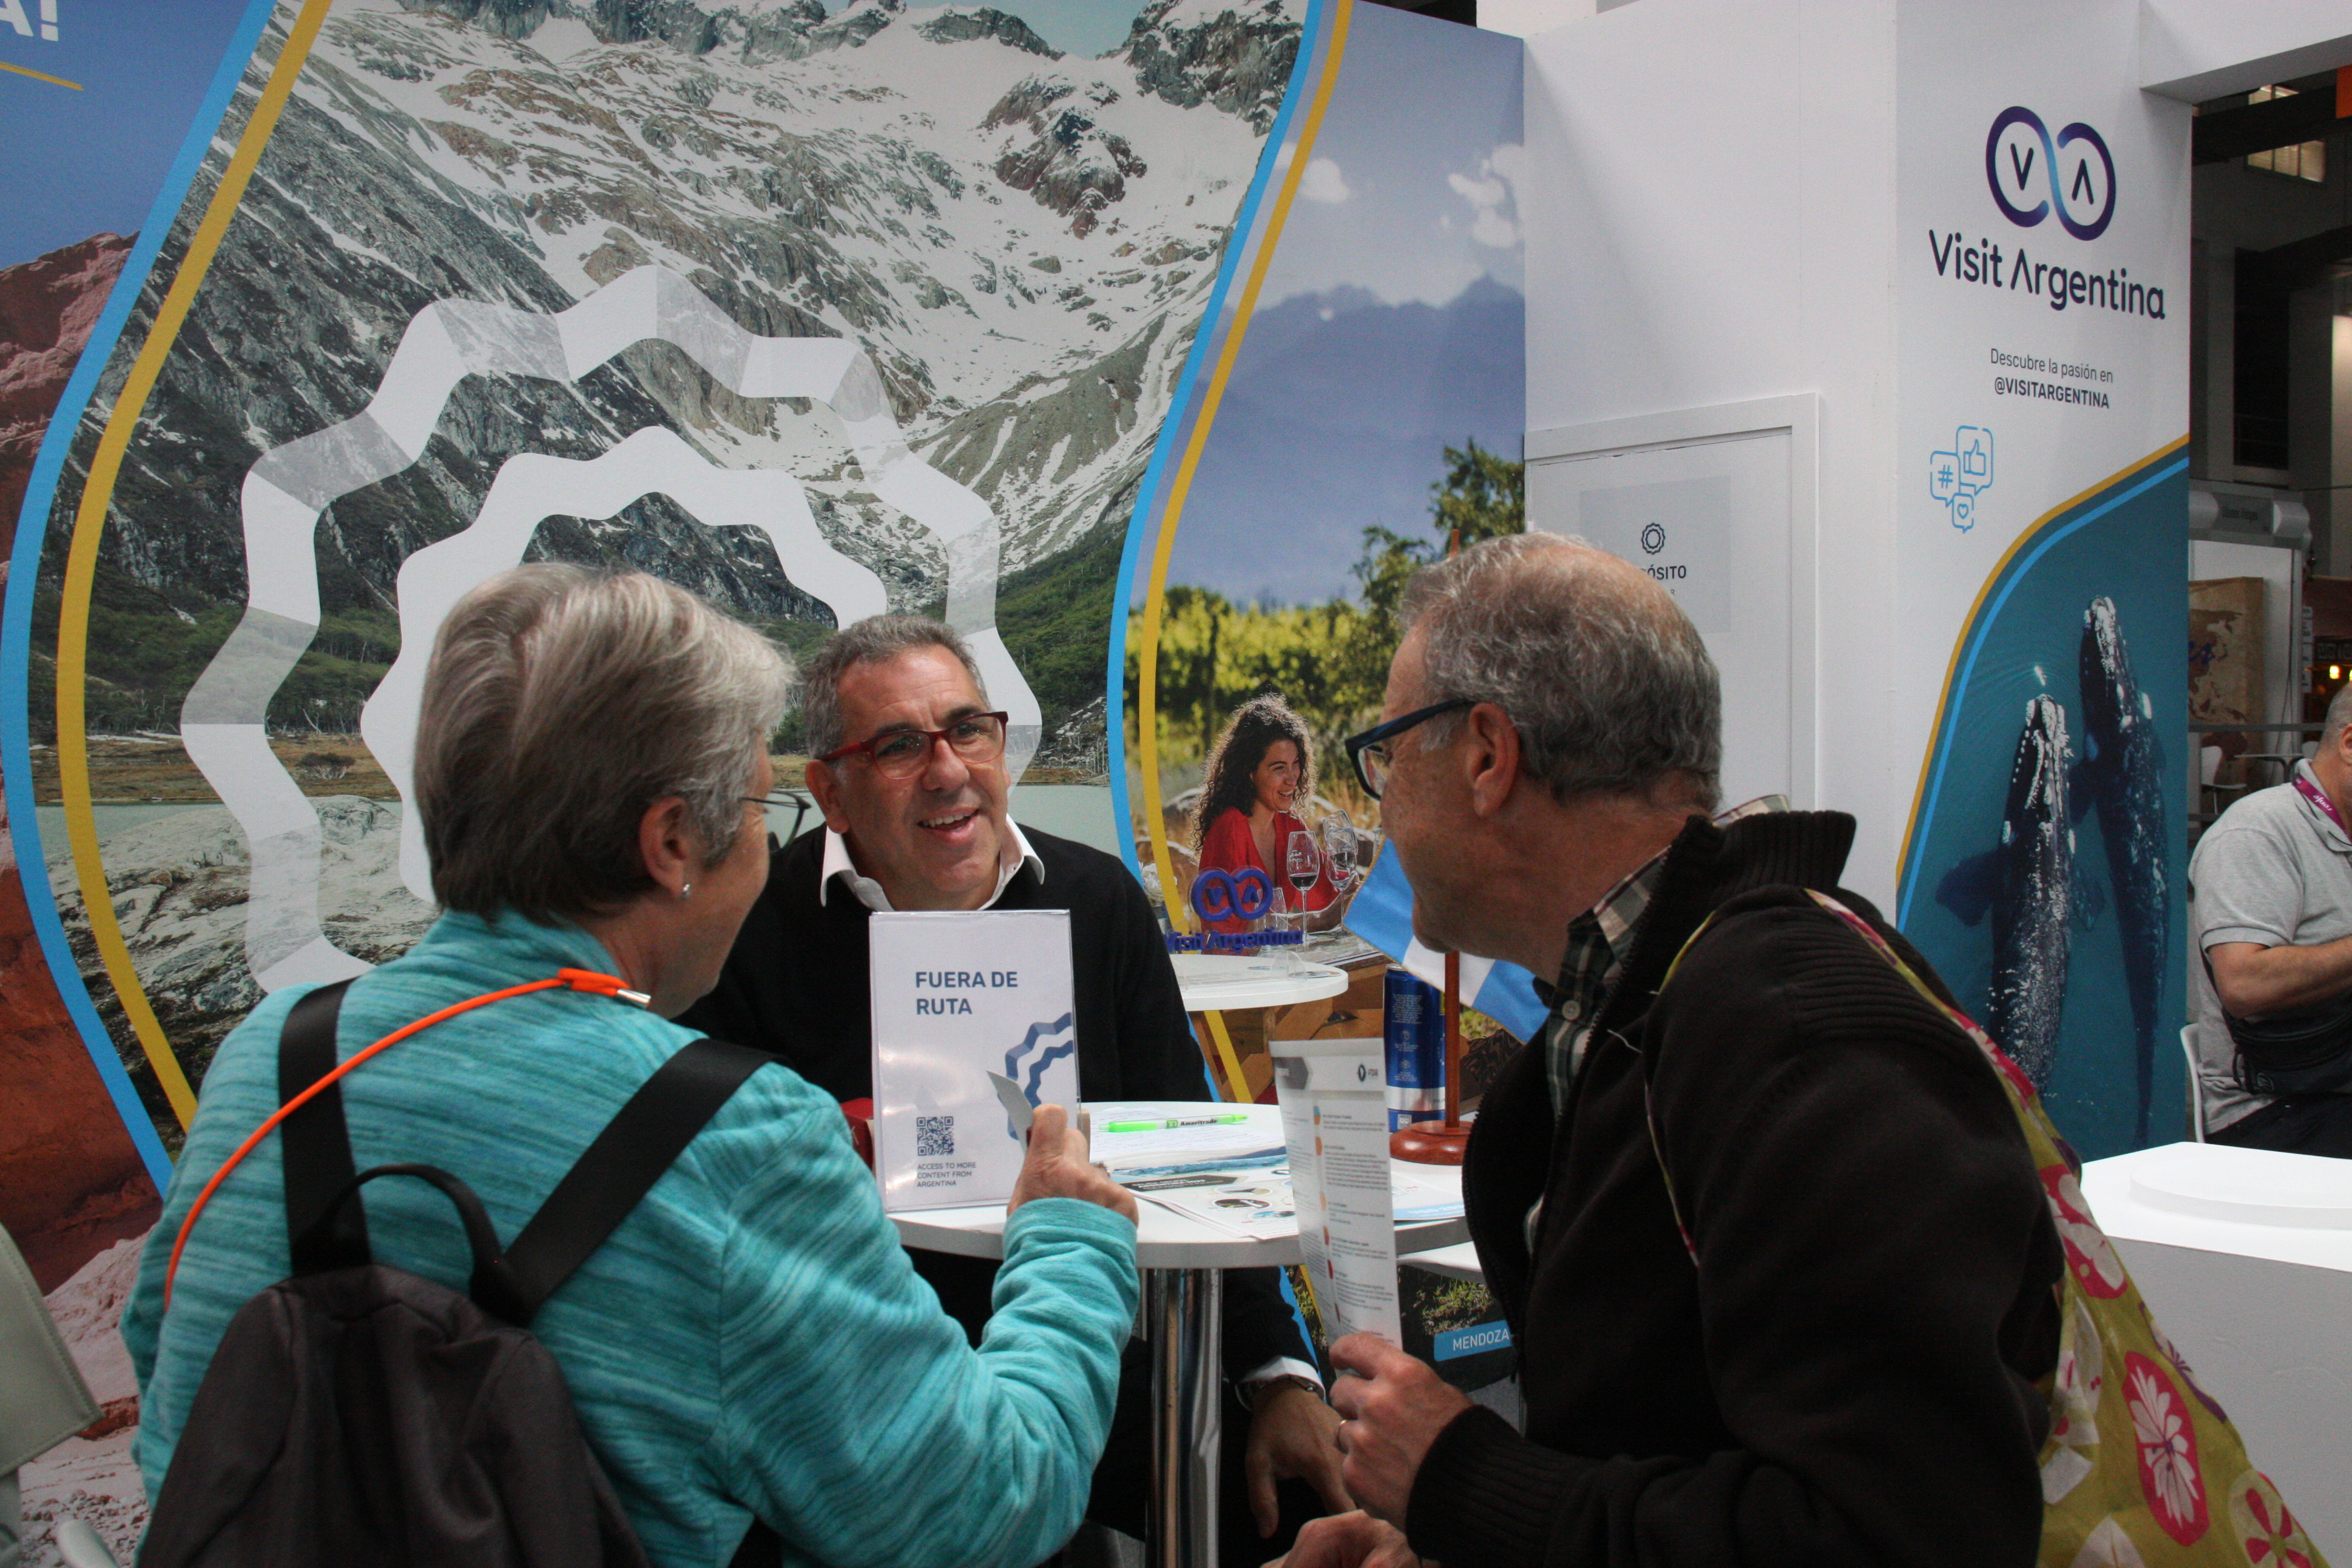 Argentina stand at B-Travel tourism fair on March 24, 2023